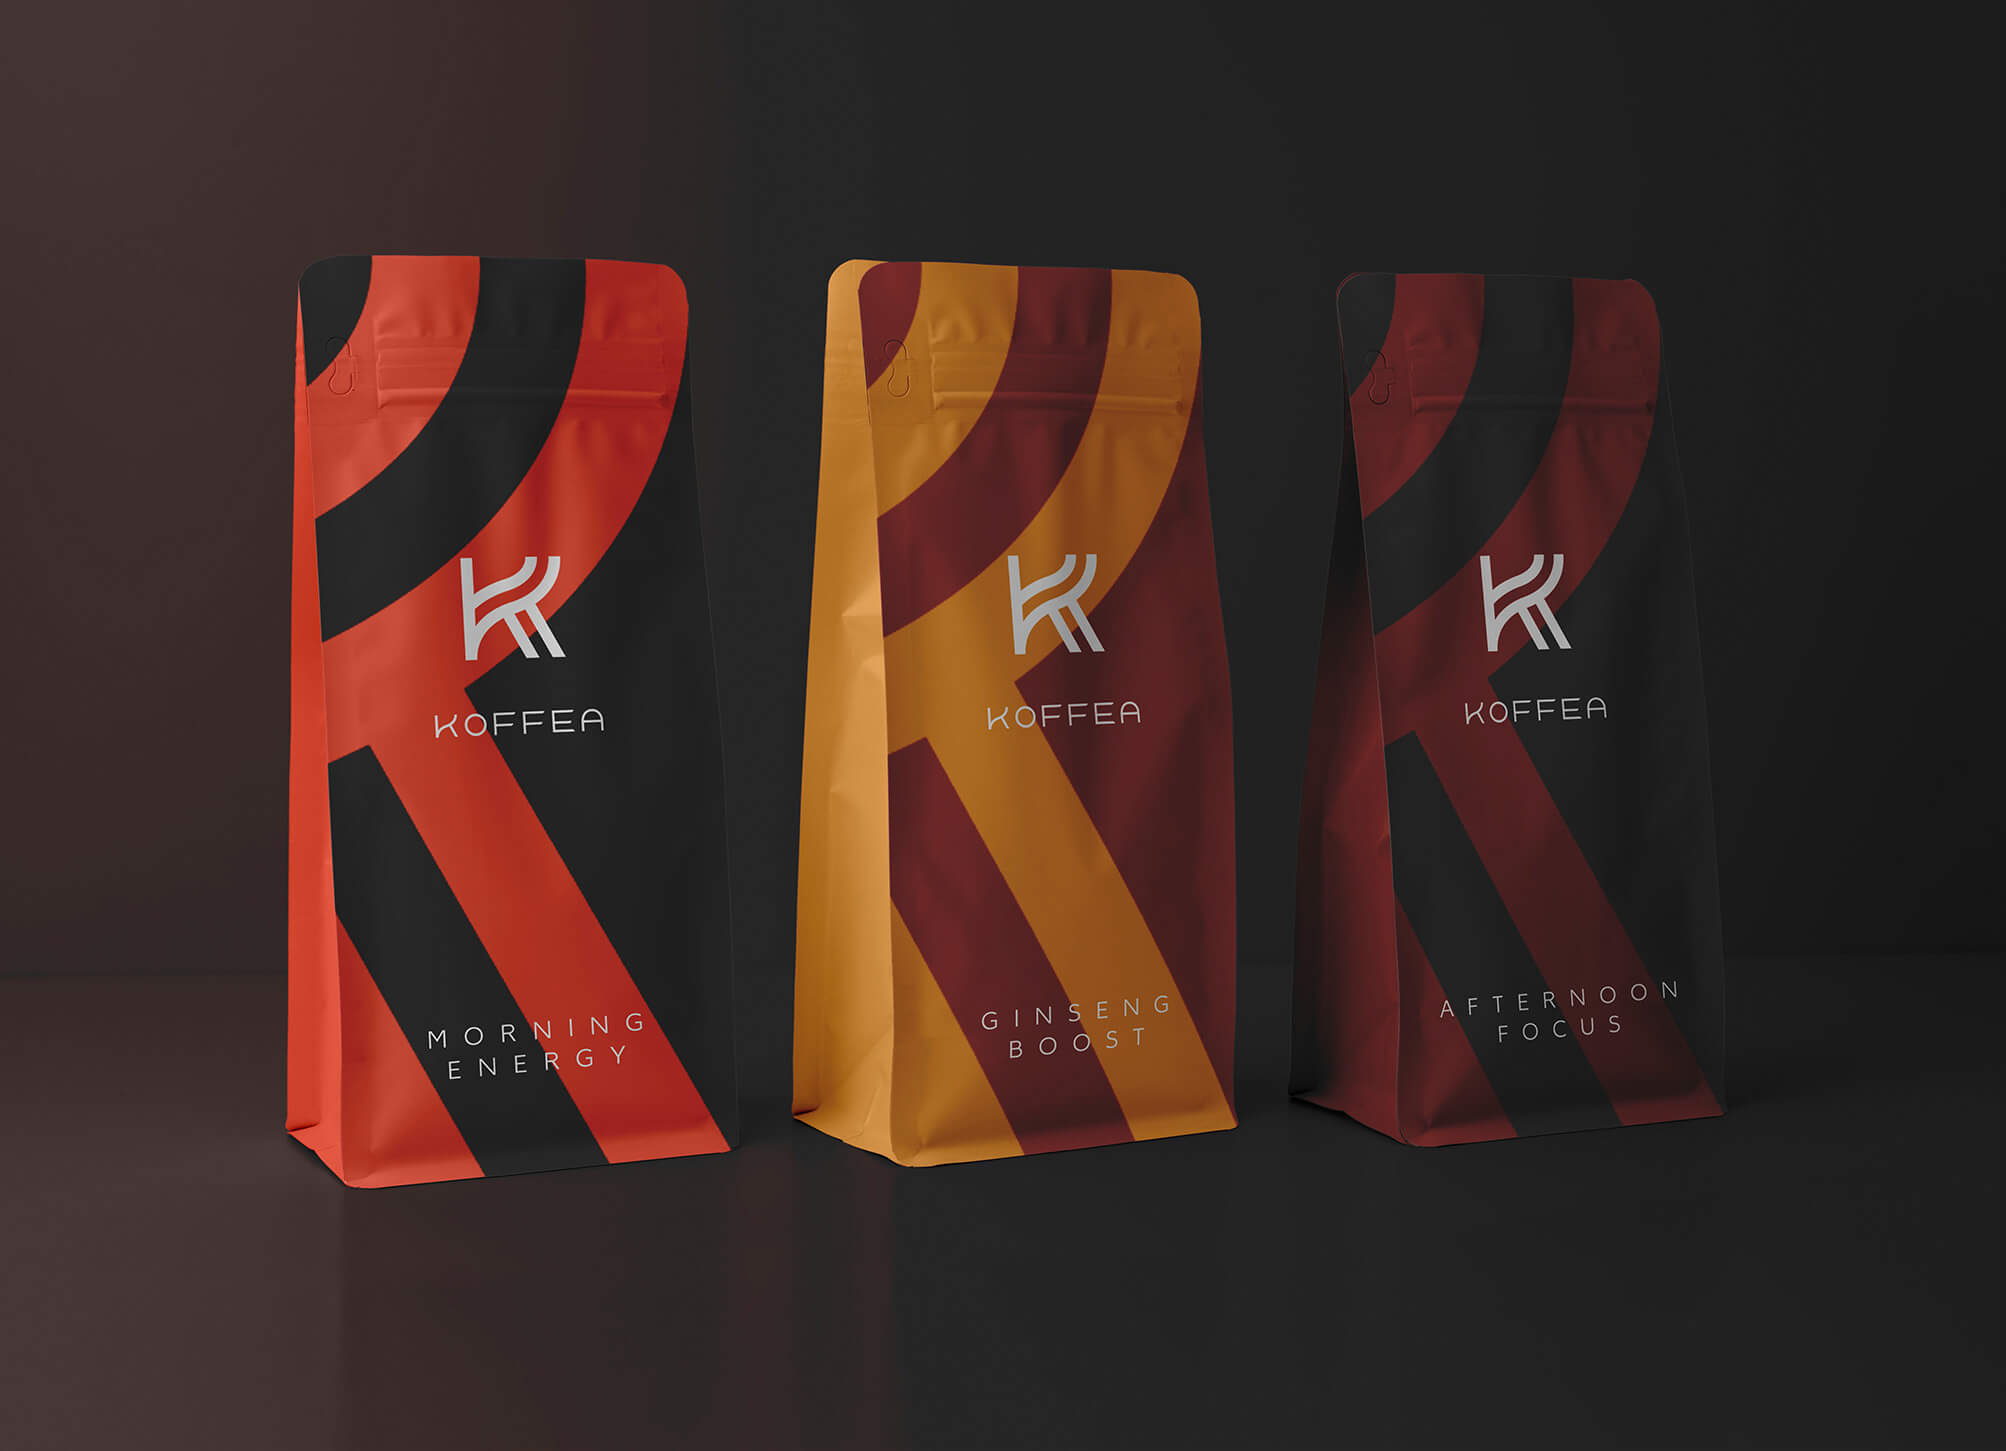 Packaging design for Koffea, Coffee producer in Palermo, Sicily